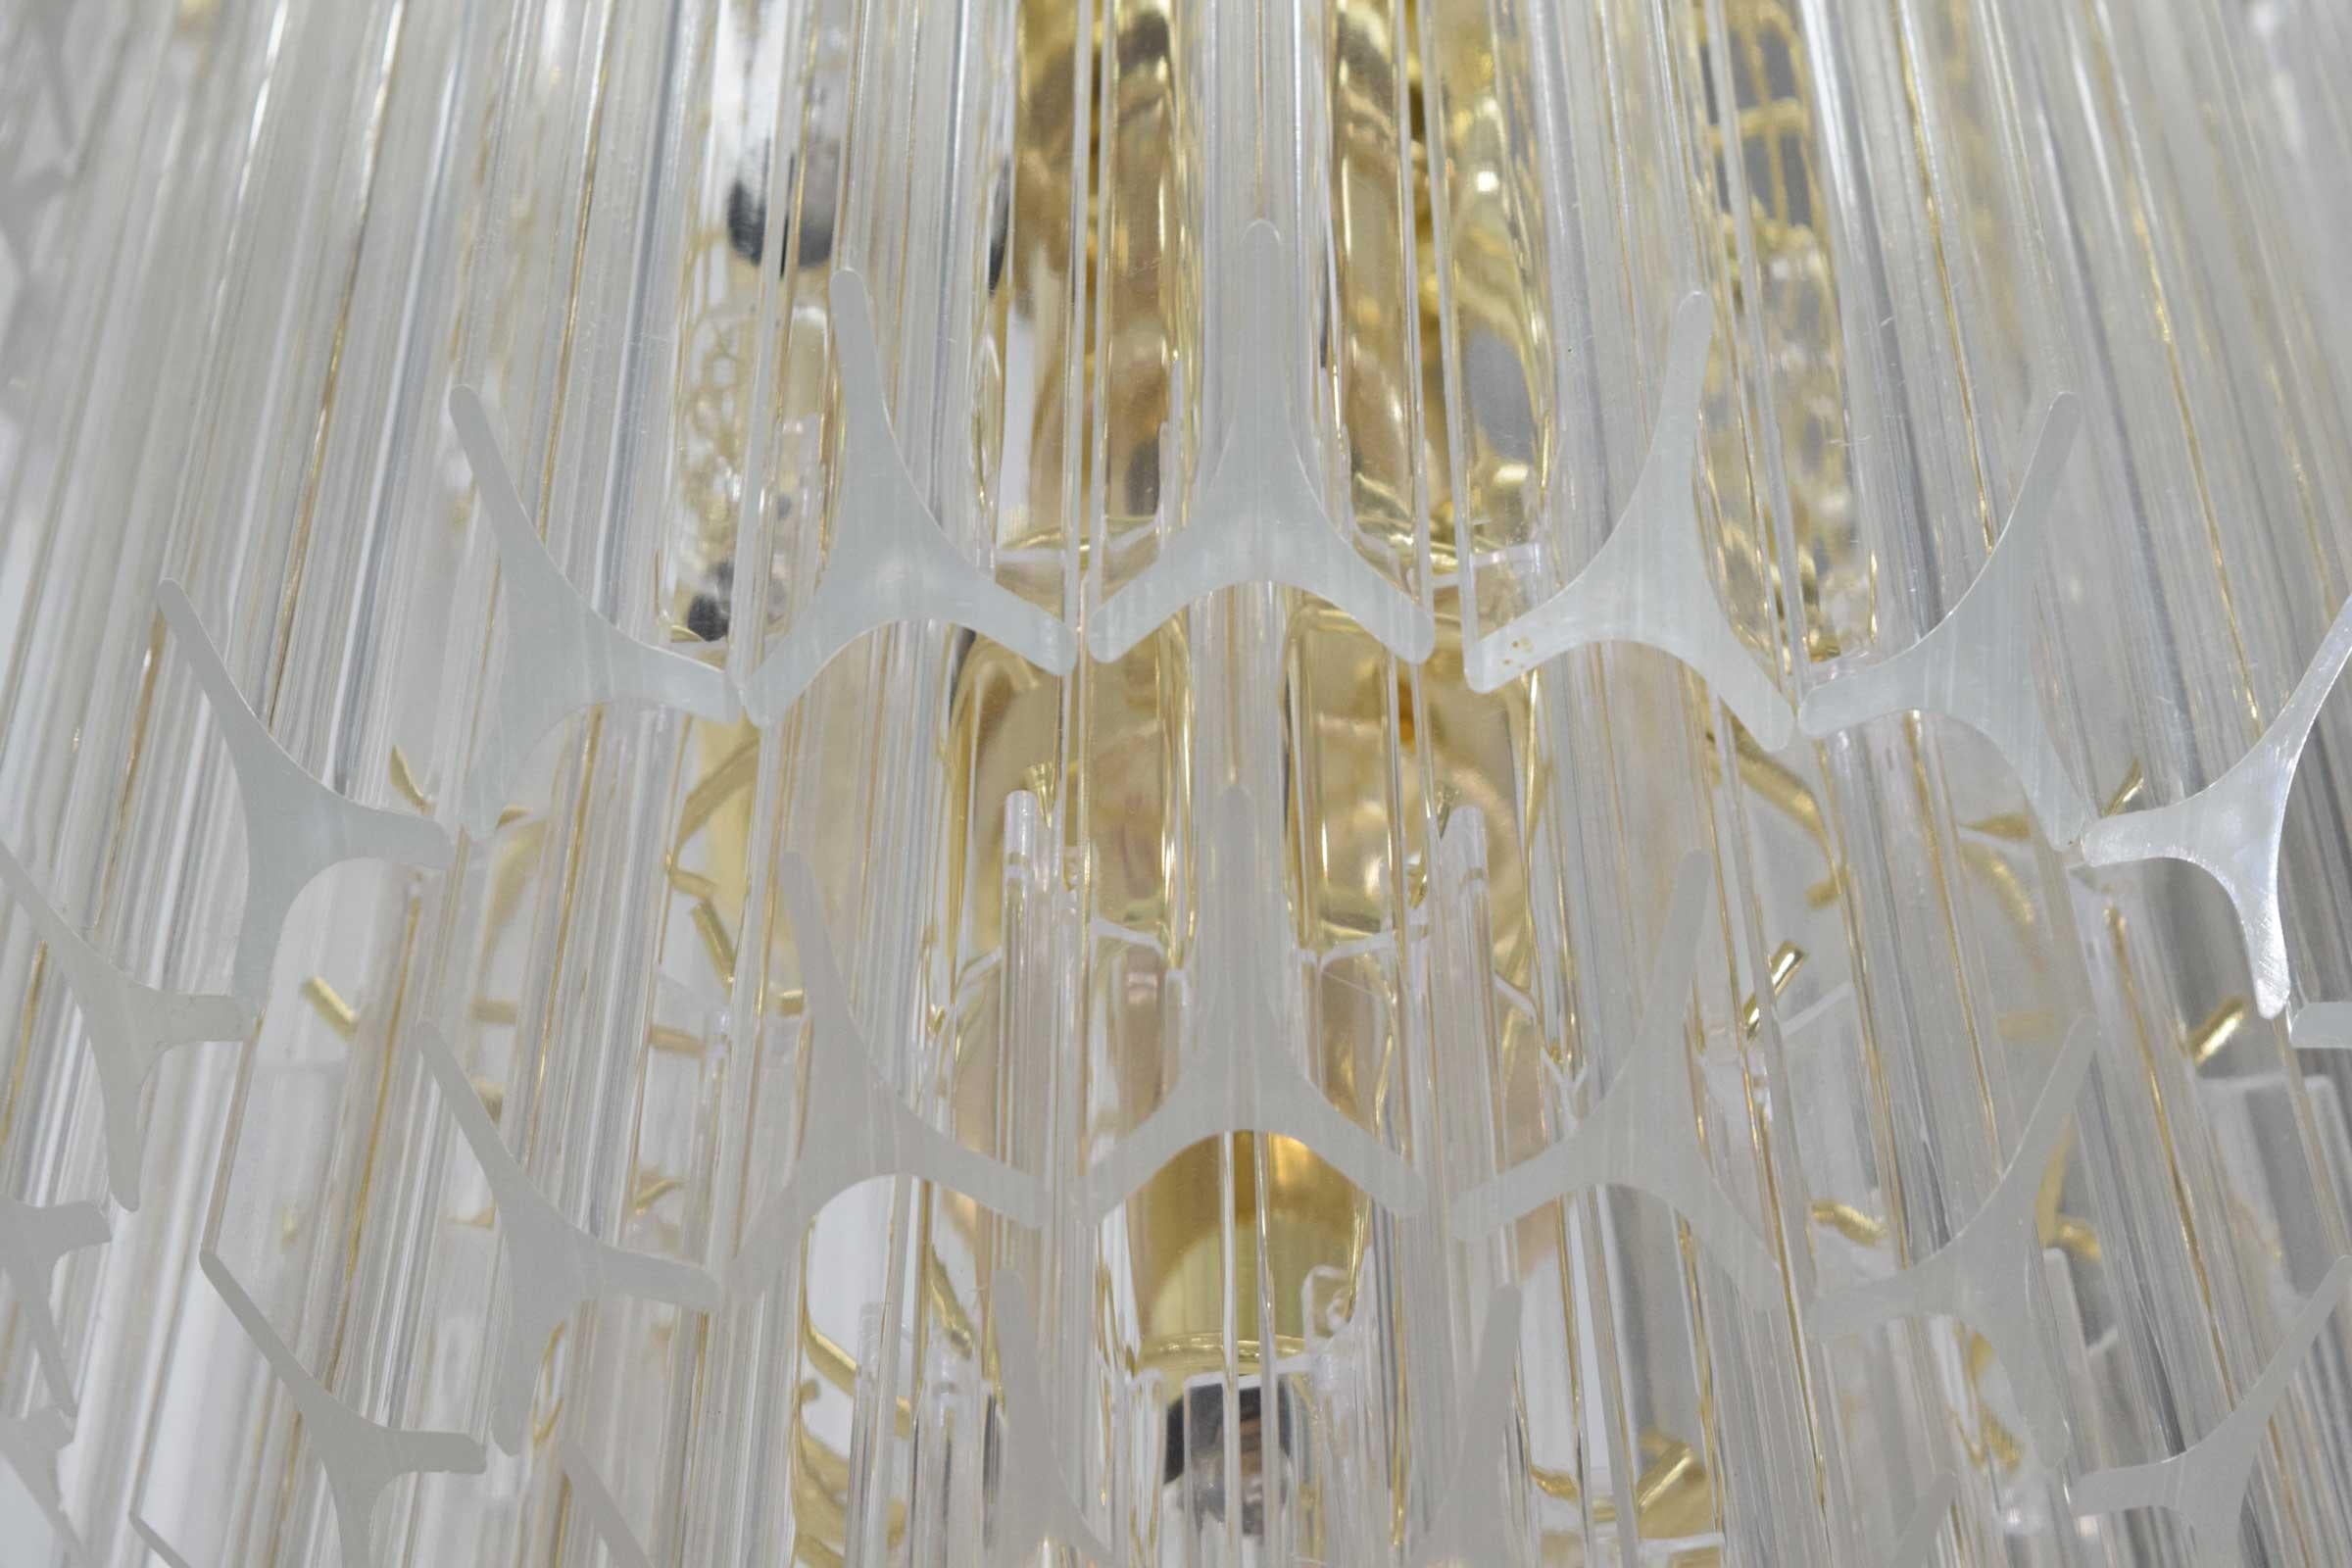 North American Large Lucite Chandelier, Six Tiers, 1970s For Sale